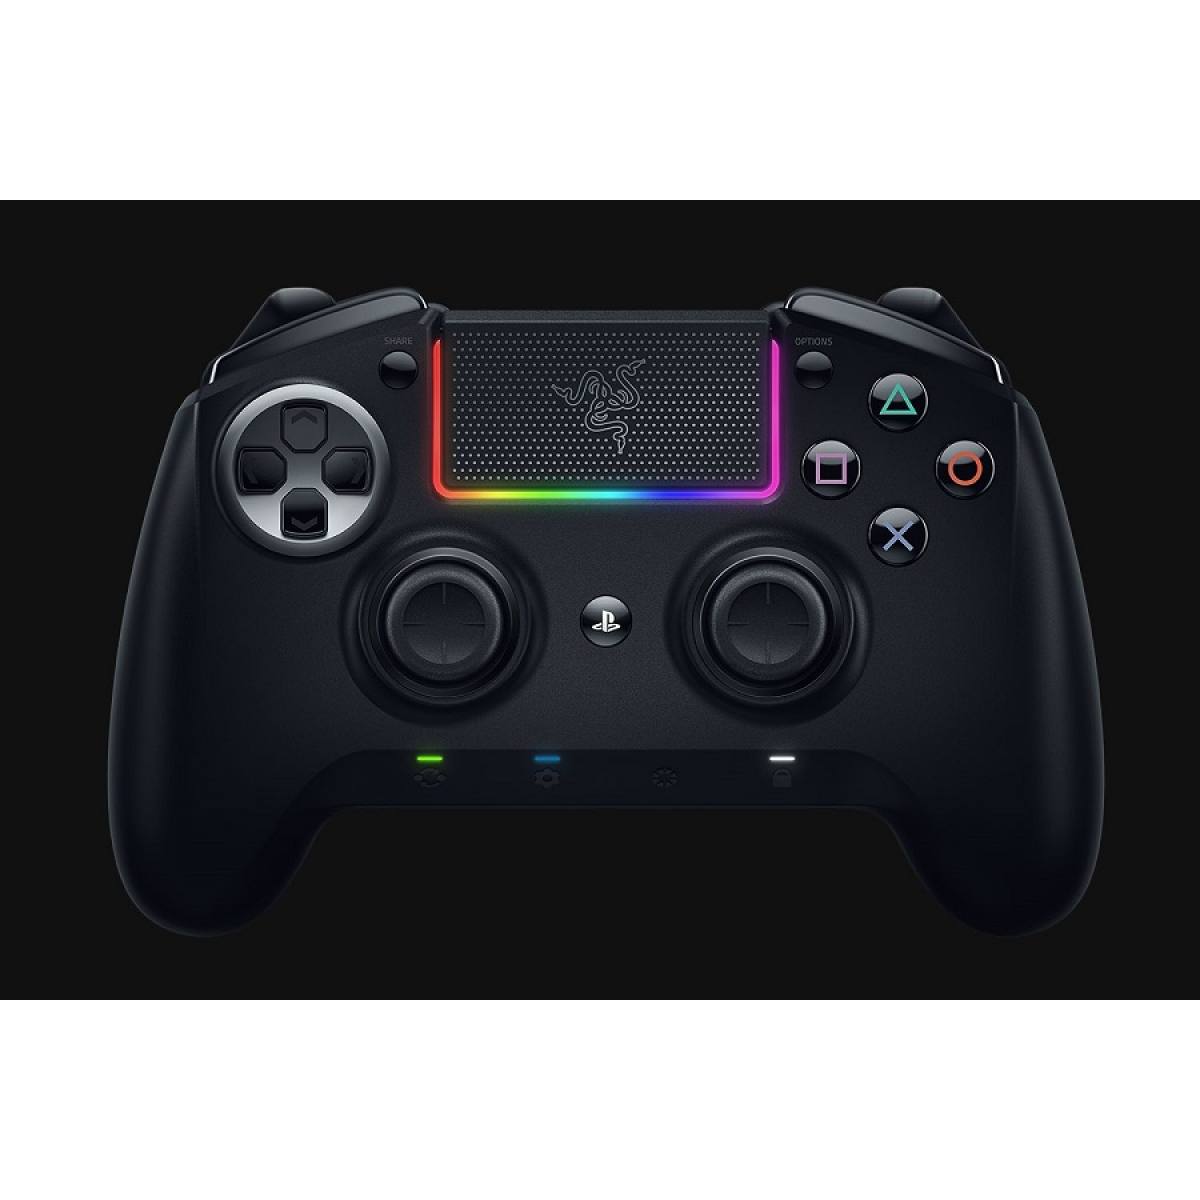 RAZER RAIJU ULTIMATE - WIRELESS AND WIRED GAMING CONTROLLER FOR PS4/PC